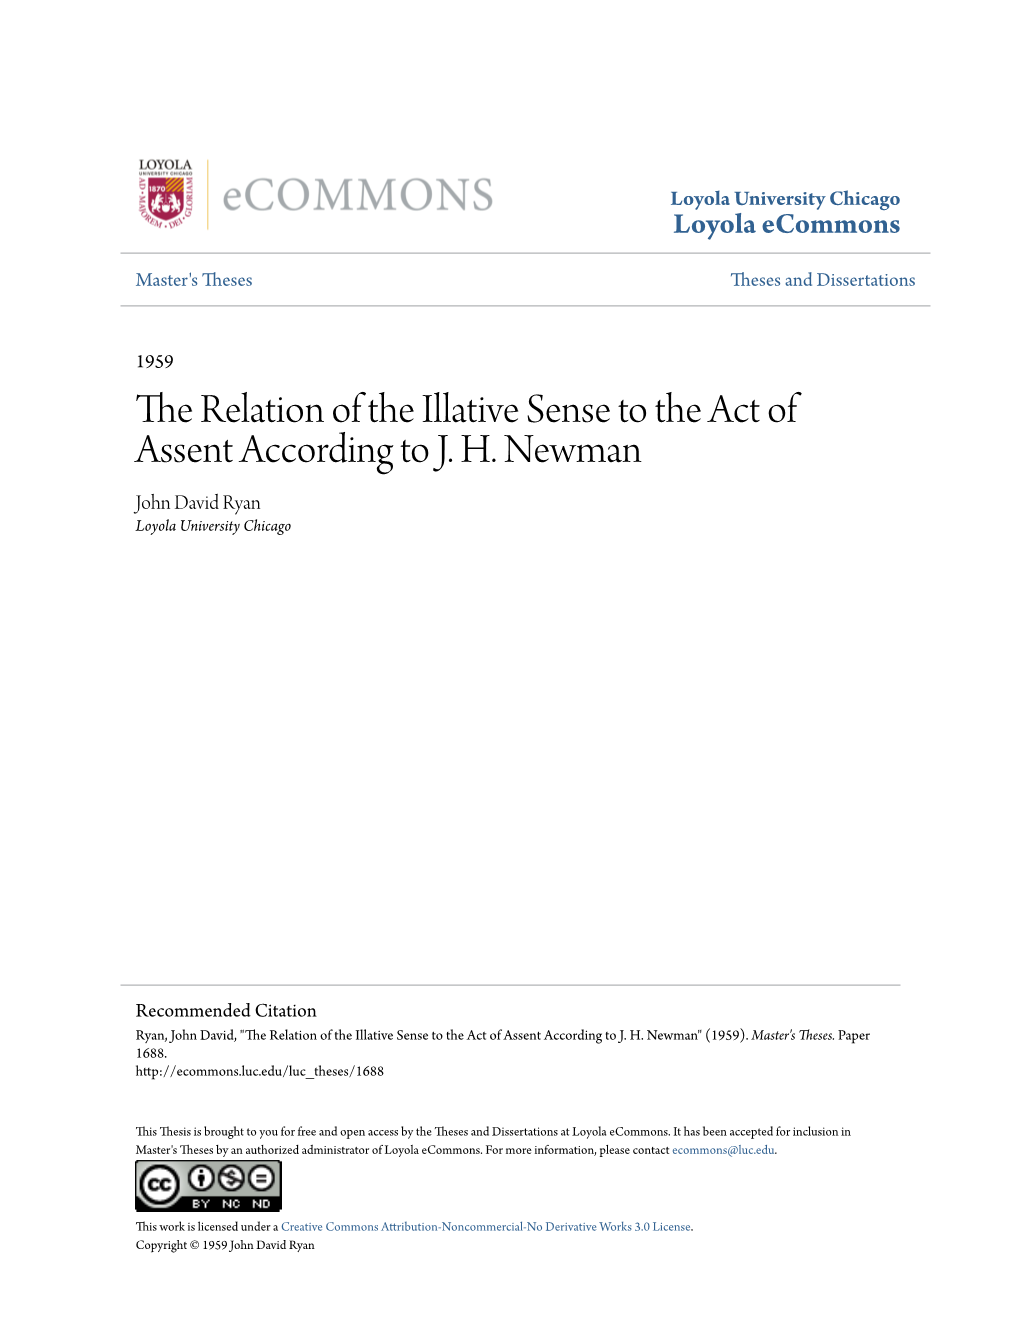 The Relation of the Illative Sense to the Act of Assent According to J. H. Newman John David Ryan Loyola University Chicago